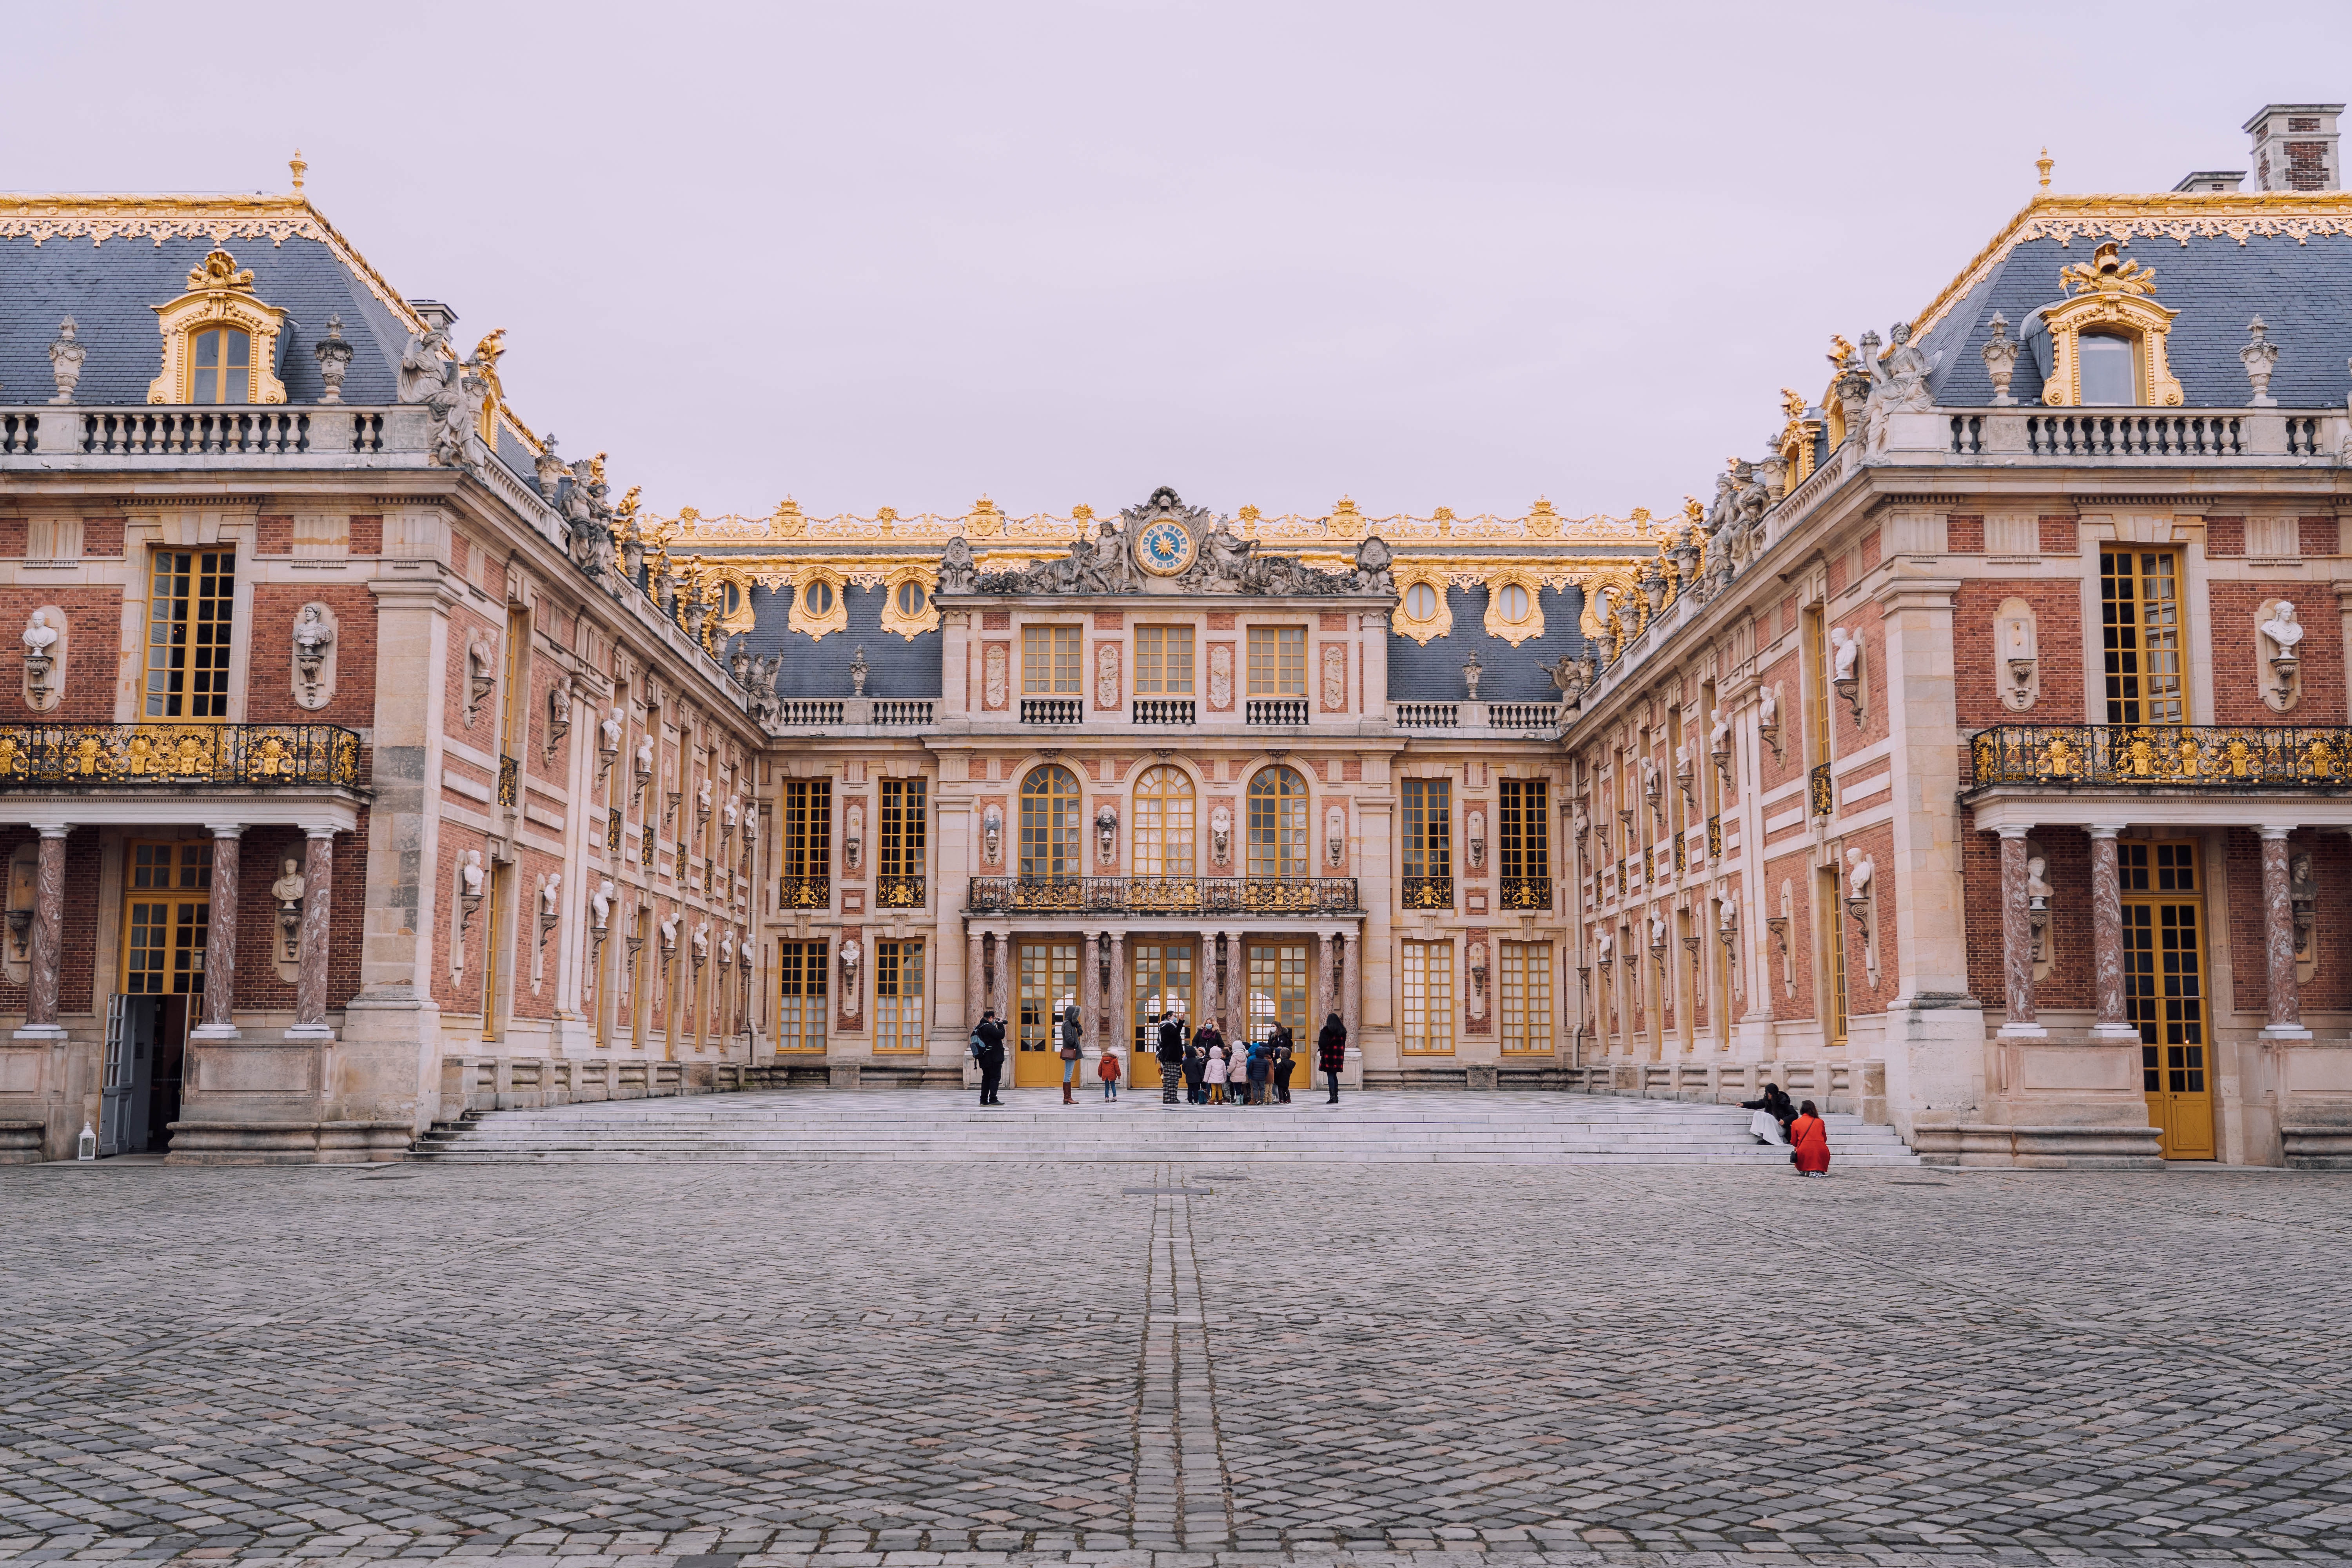 DISCOVER THE CASLTE OF VERSAILLES